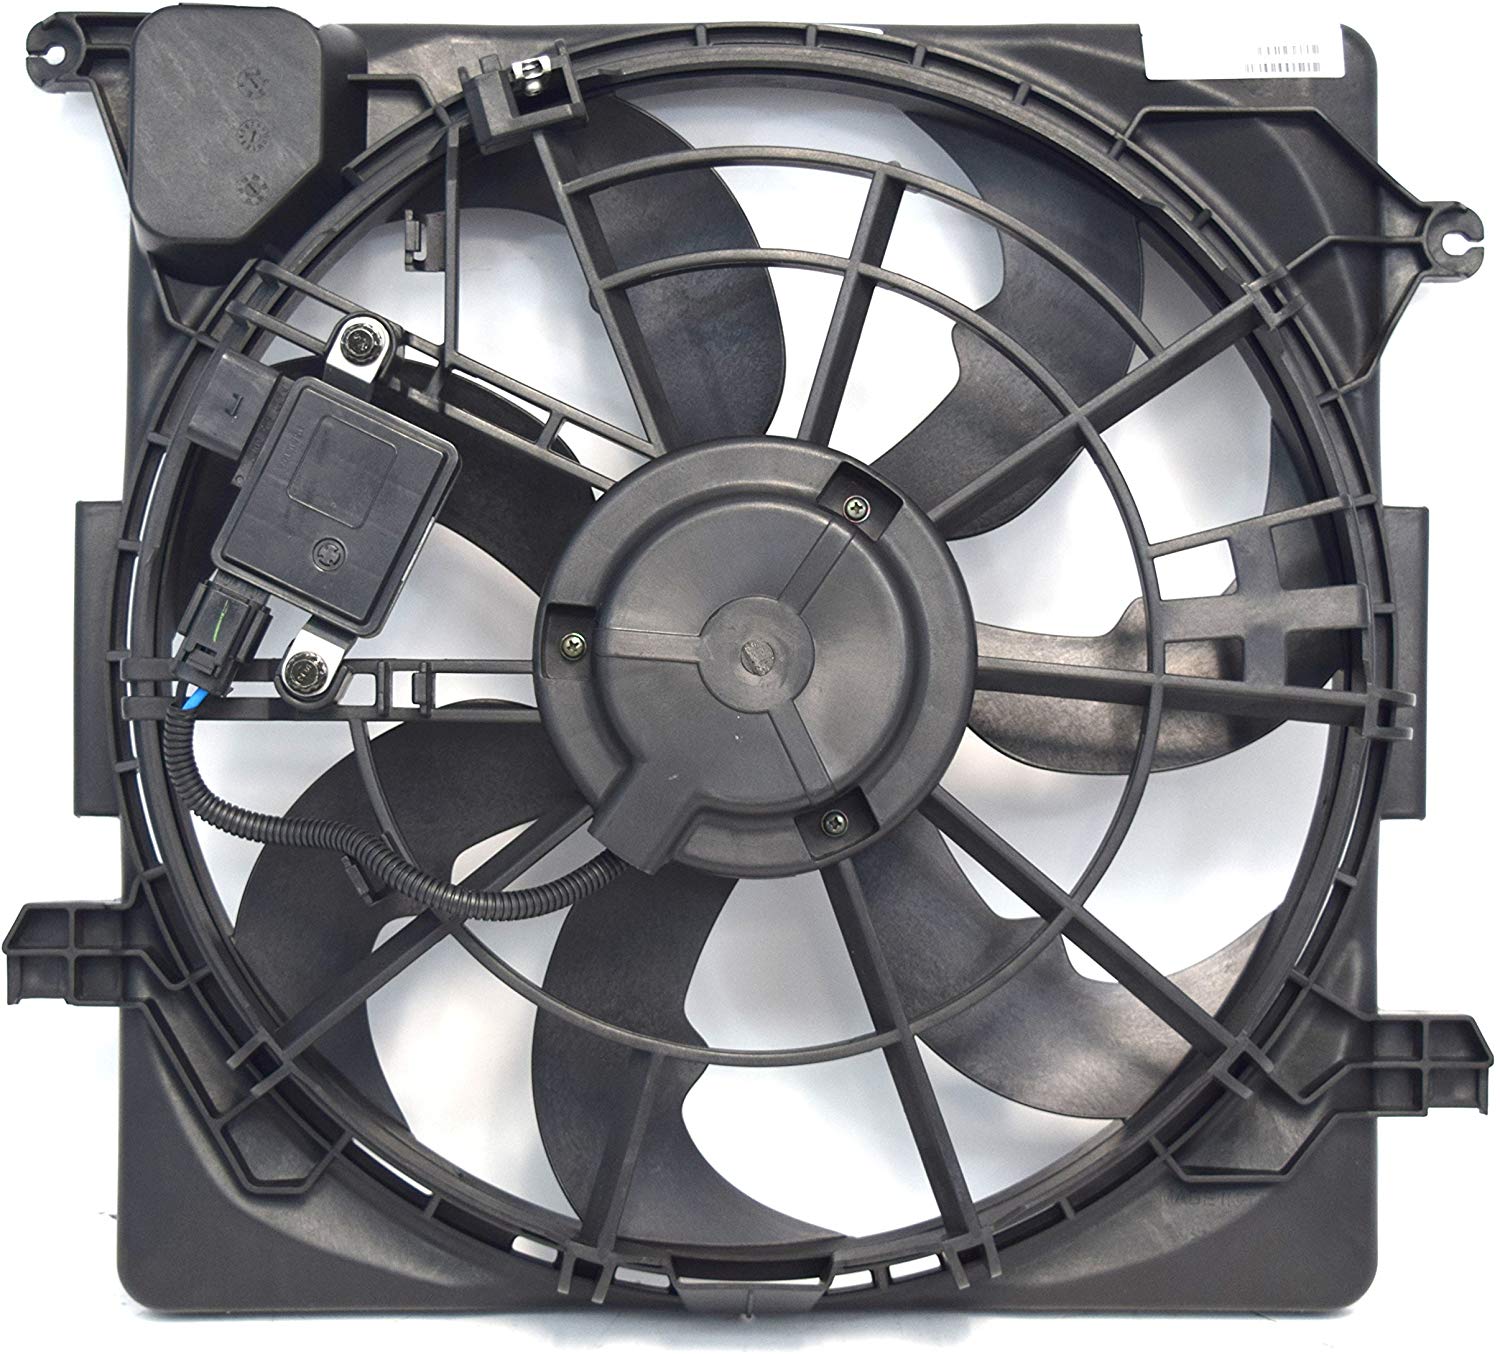 Automotive Cooling Radiator Cooling Fan Assembly For Hyundai Tucson HY3115154 100% Tested